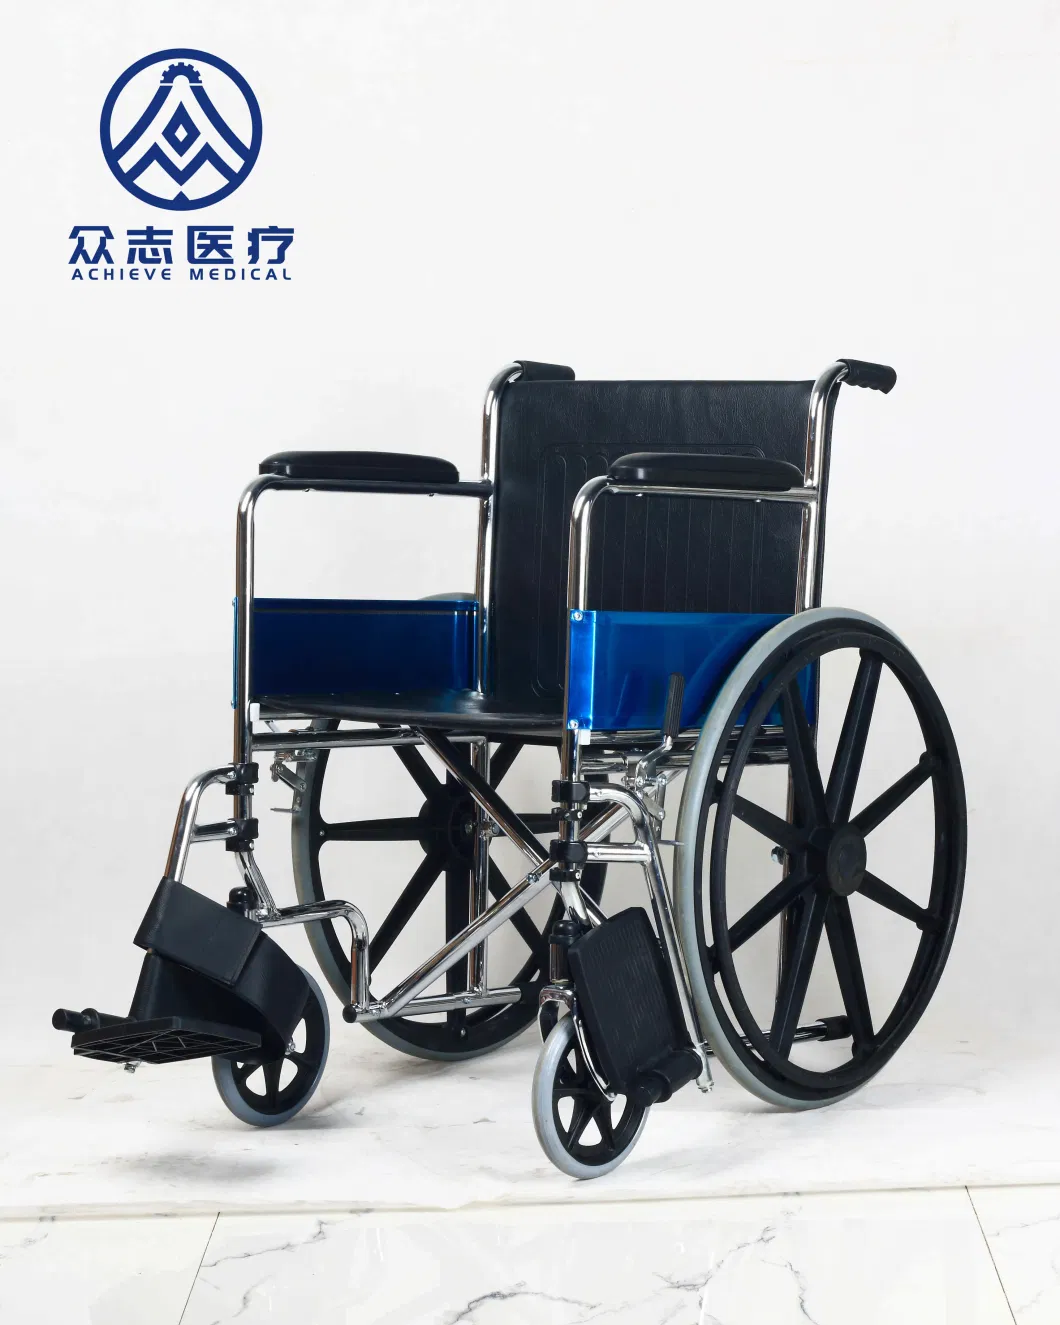 Achieve New Design with Patent Foorest Manual Steel Mag Wheel Folding Wheelchair